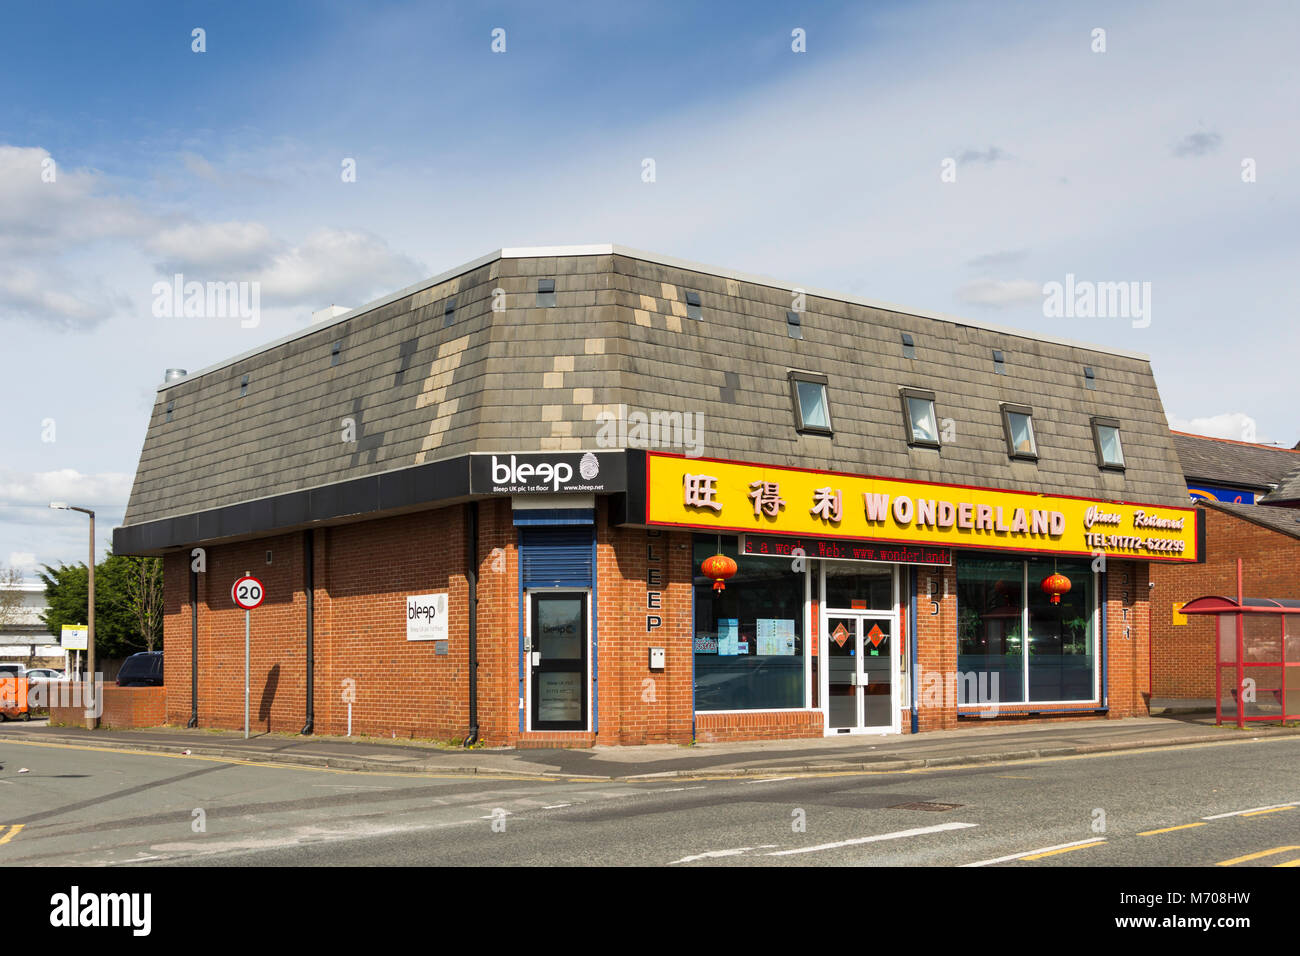 Wonderland Chinese restaurant on Lancastergate, Leyland, Lancashire. Also regional office of Bleep UK PLC, a maker and supplier of EPOS systems. Stock Photo